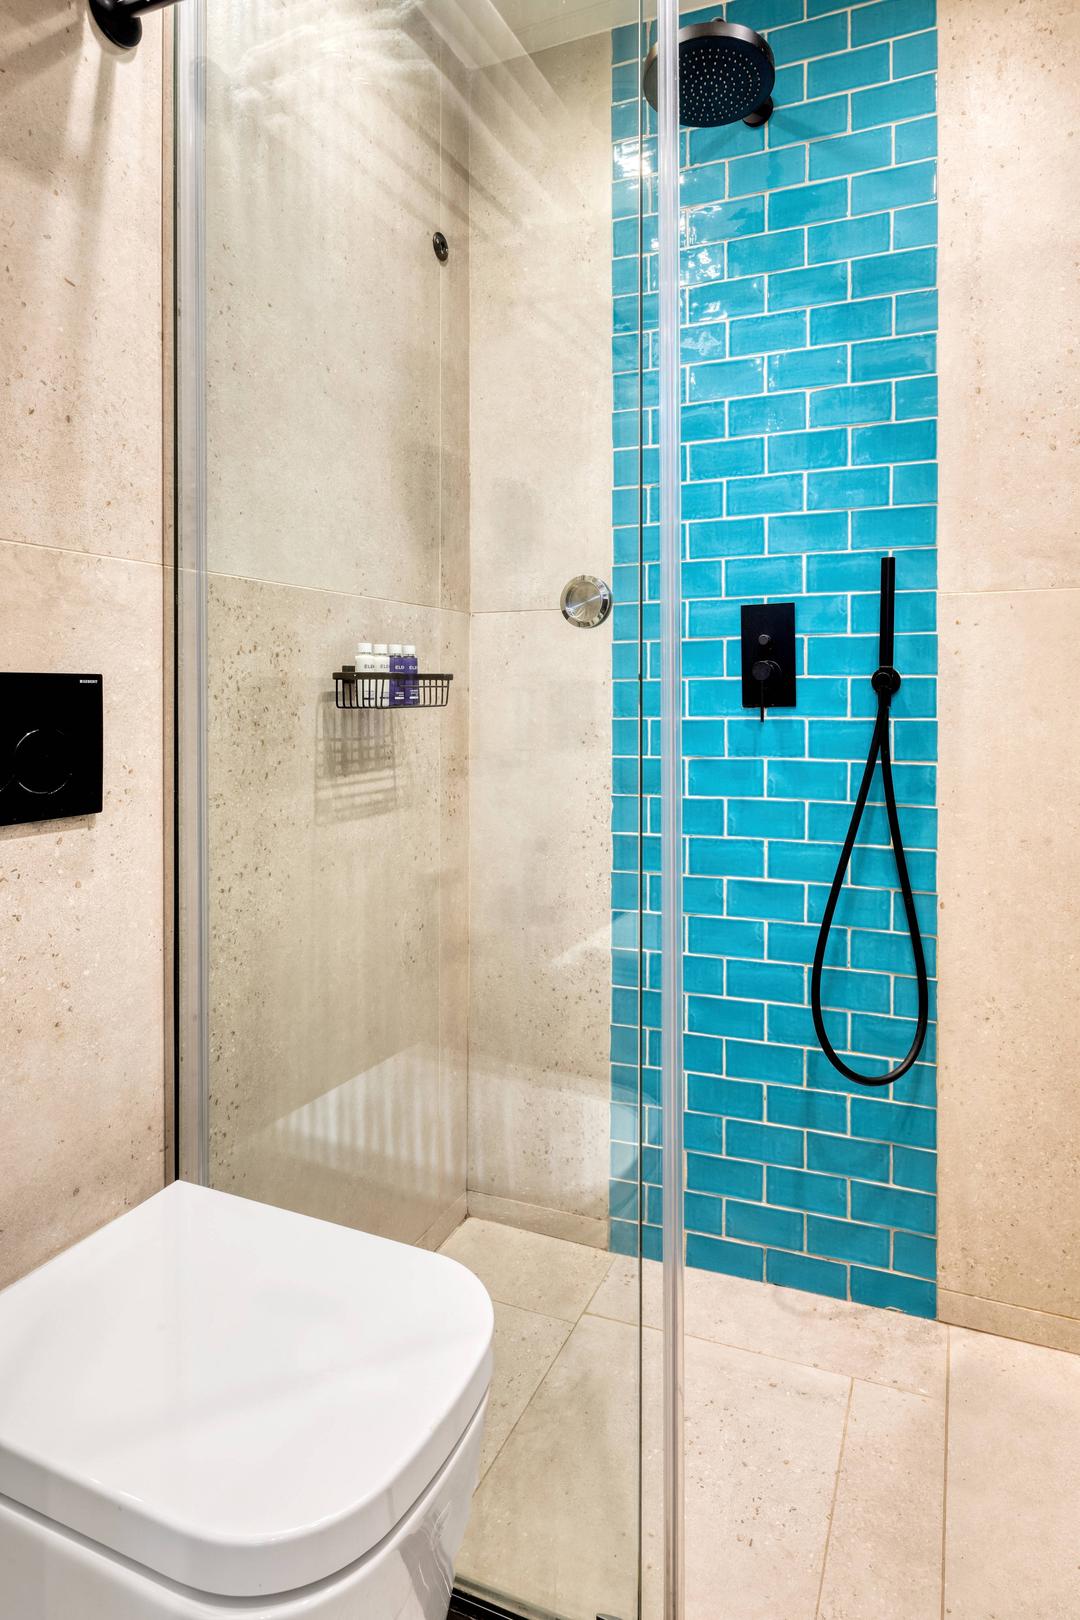 Uniquely designed bathrooms with a walking shower.